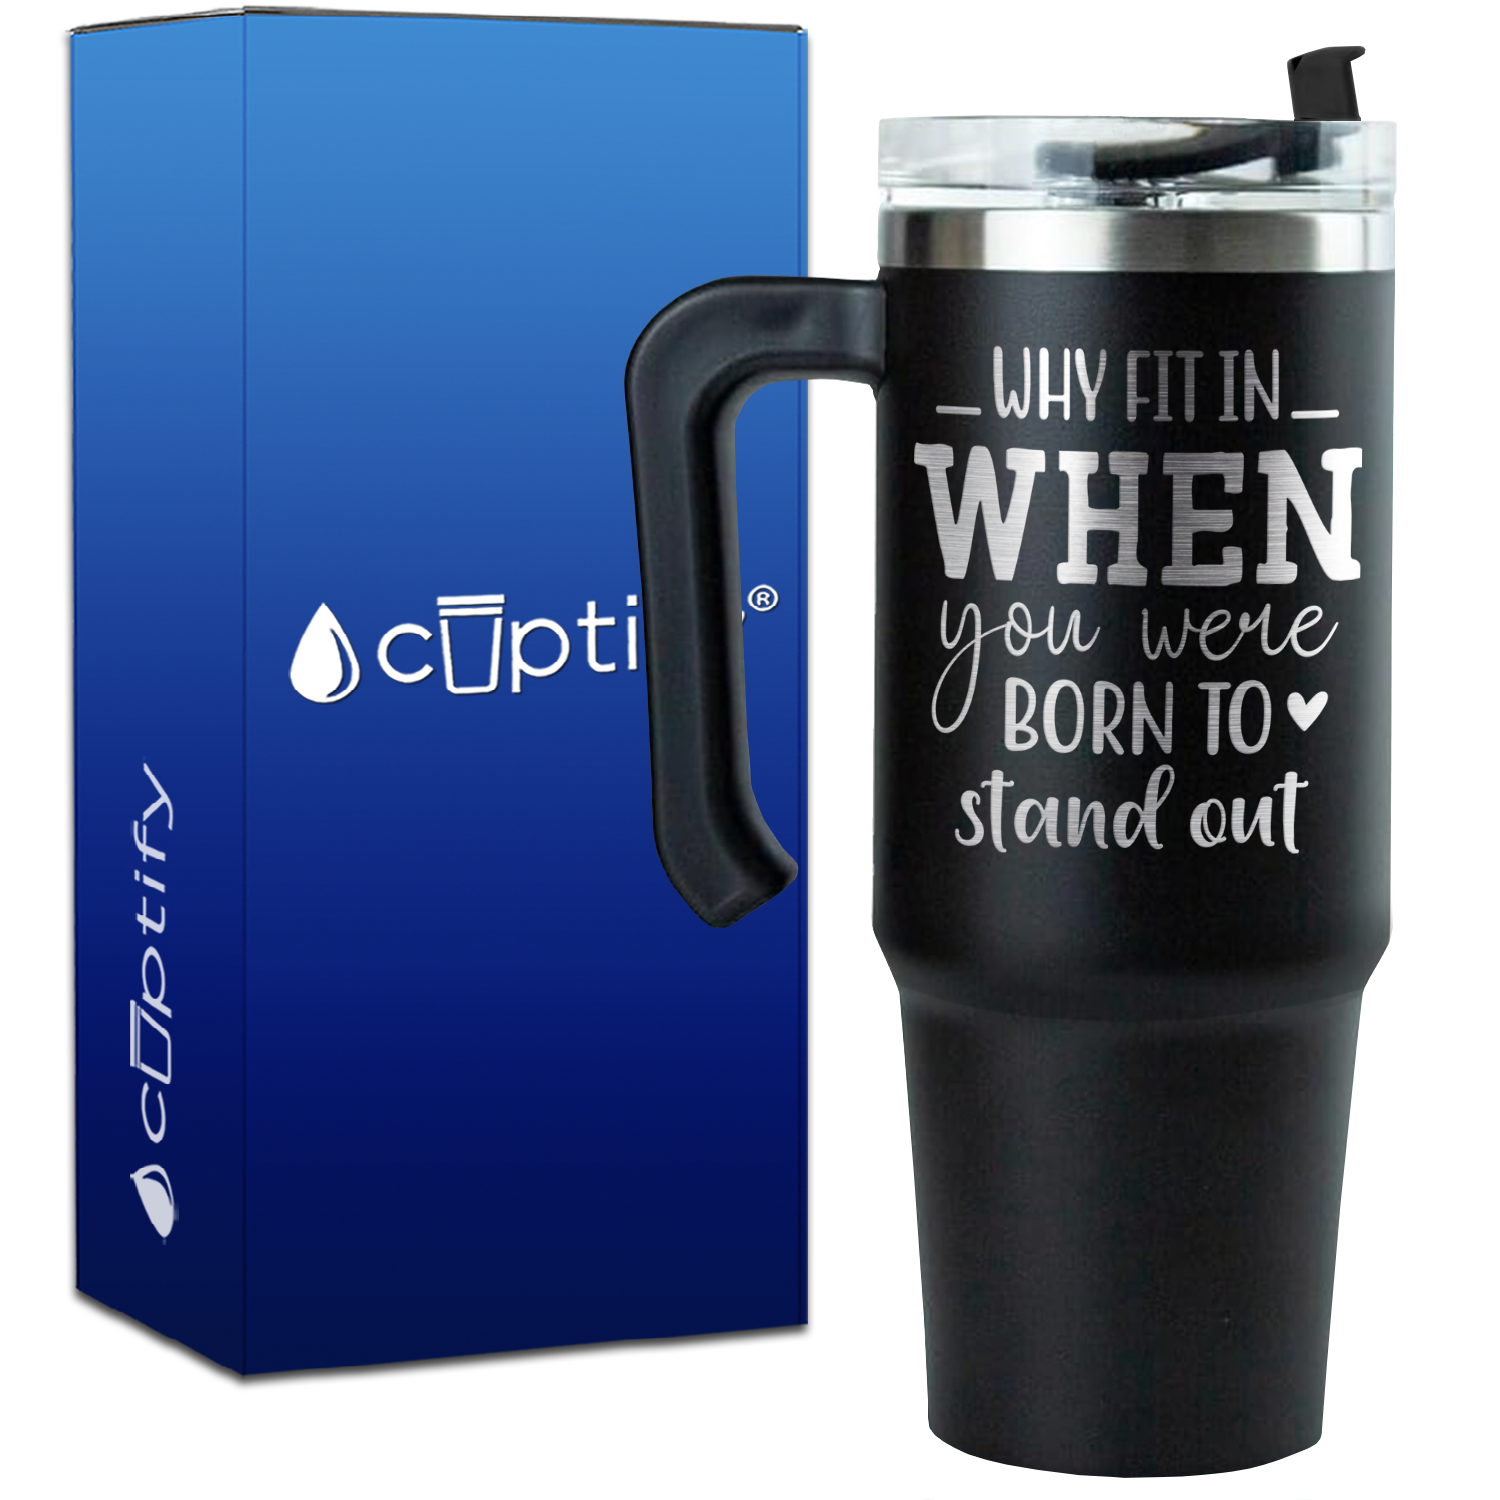 Why Fit in When You Were Born to Stand Out on 30oz Gymnastics Travel Mug